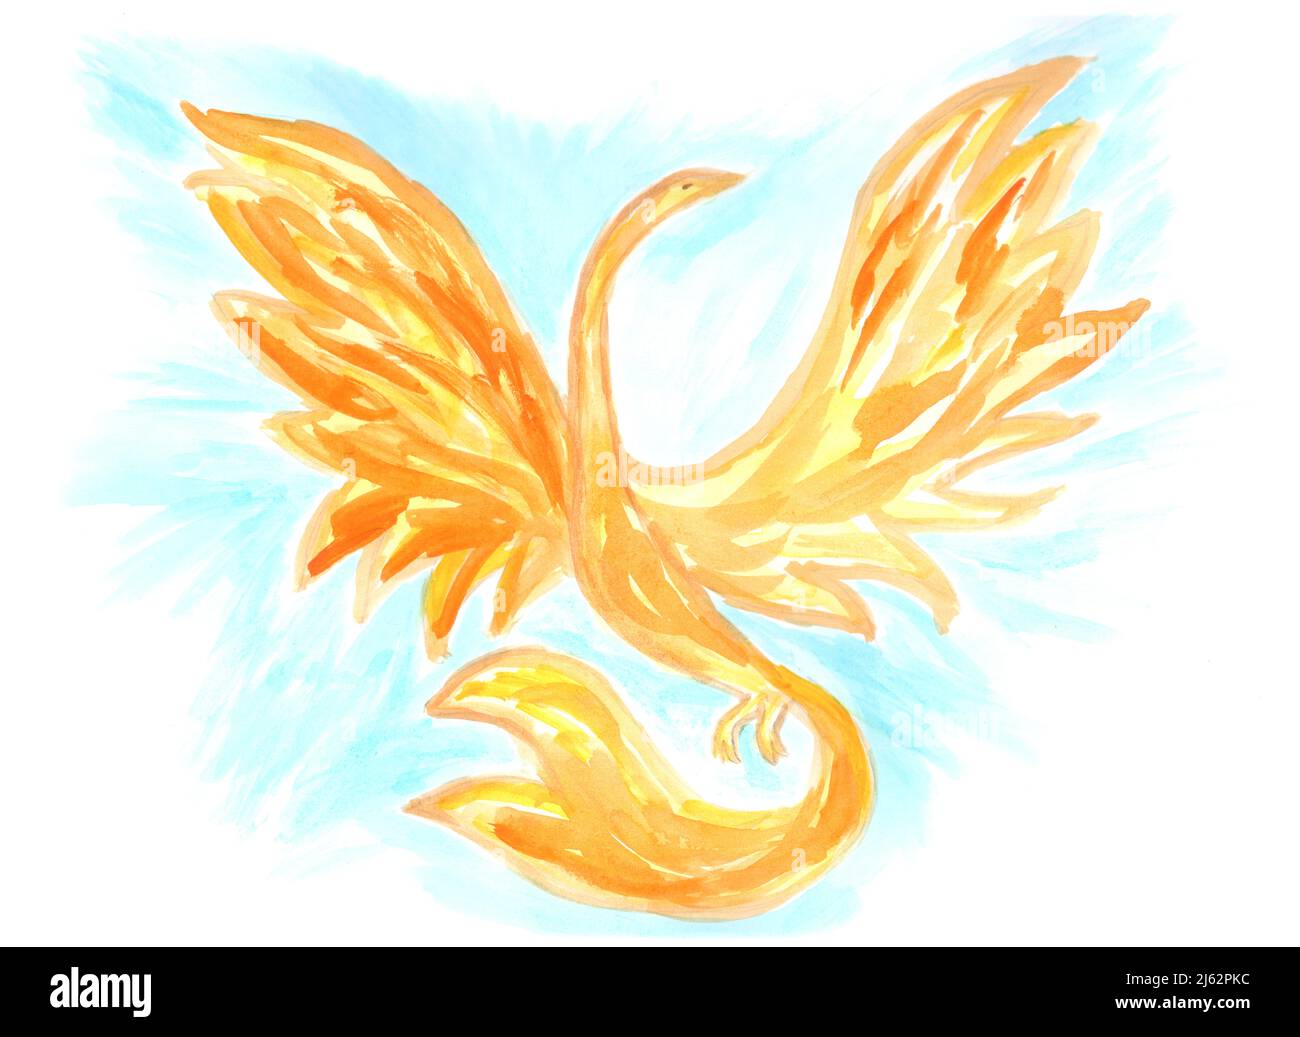 Yellow bird on a blue background. The symbol of the resurgent Ukraine. Golden firebird, fairy tale character. Color watercolor painting Stock Photo